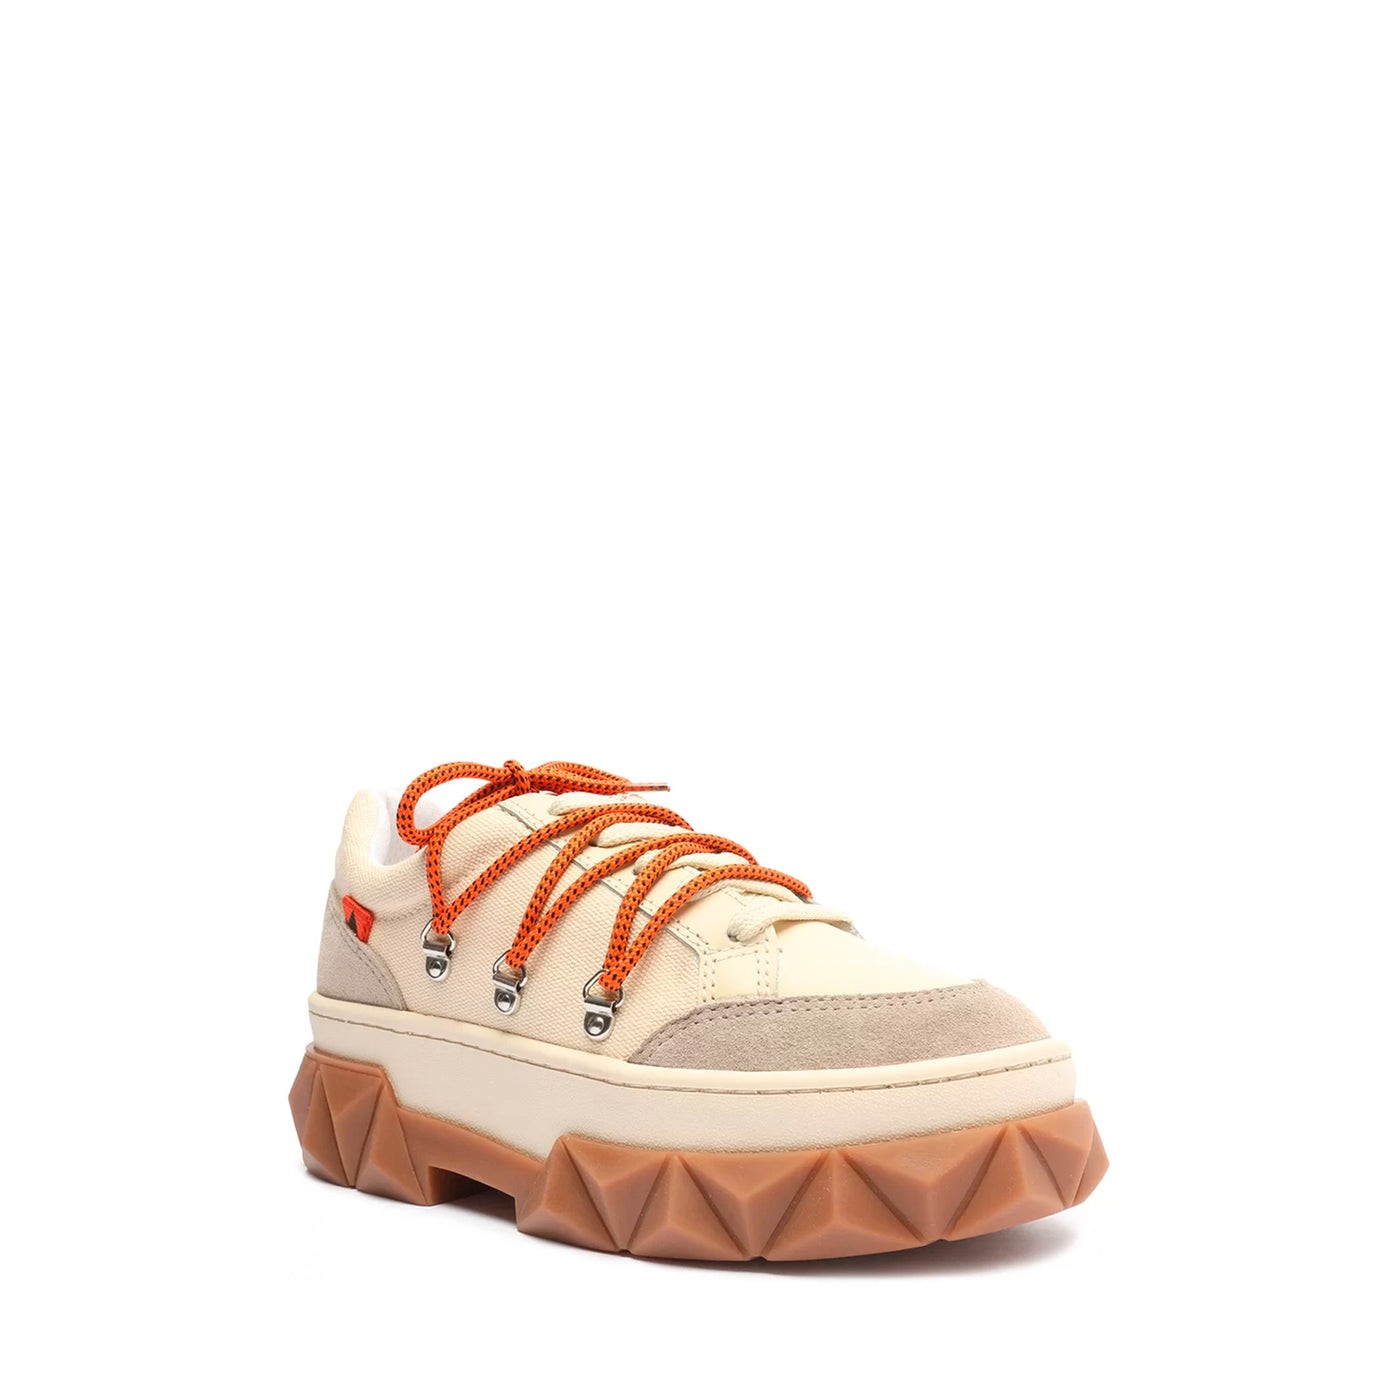 TENIS NAPA / SUEDE EGG SHELL / MINERAL